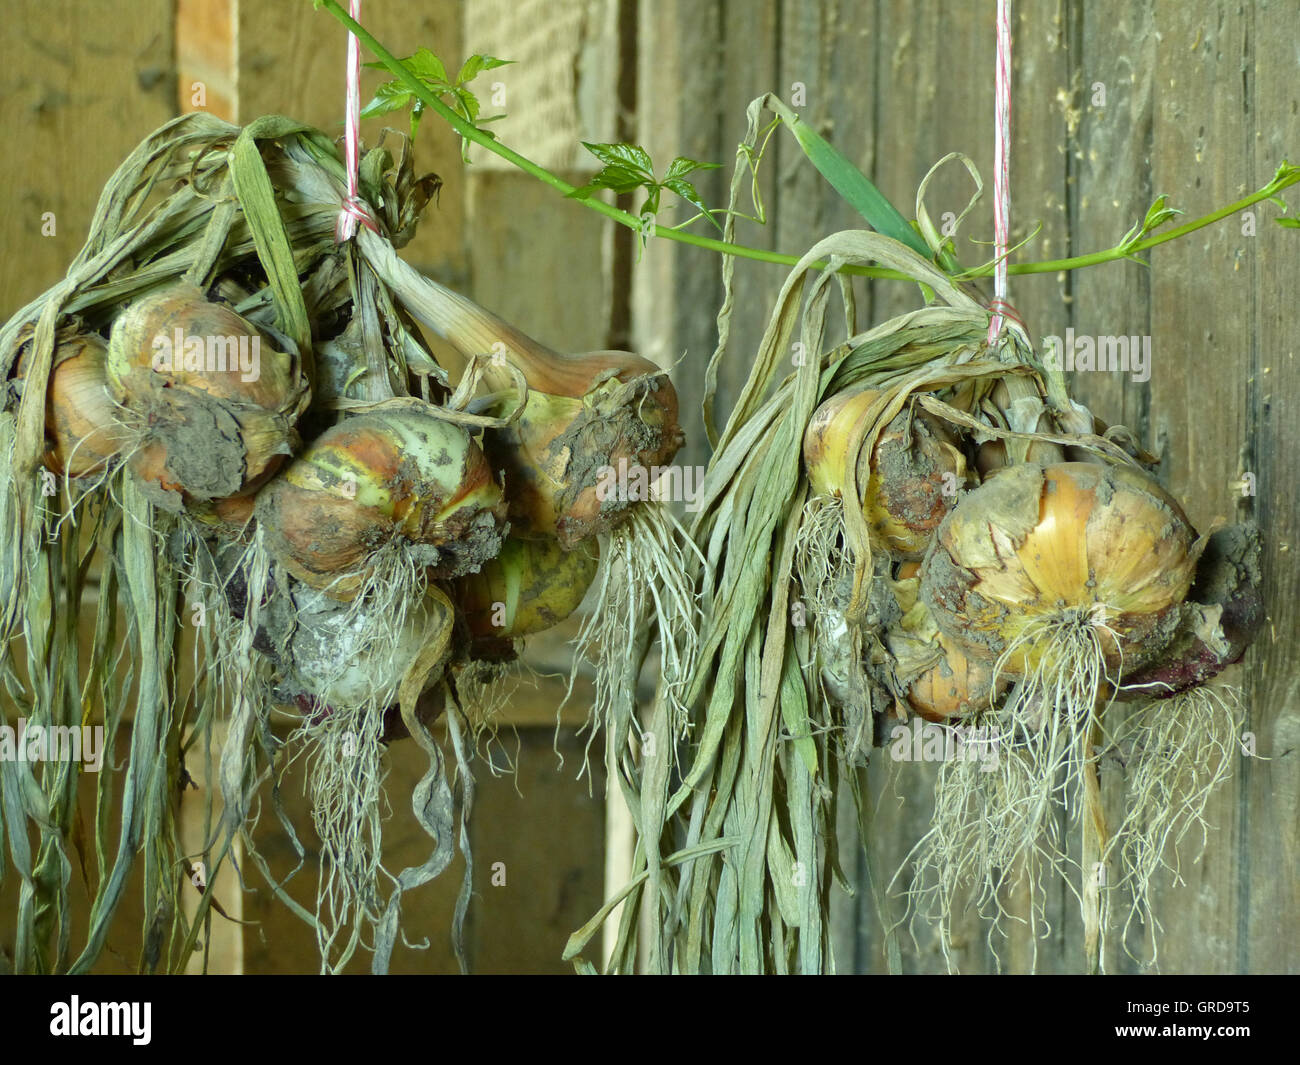 Onions Hung Up For Drying Stock Photo